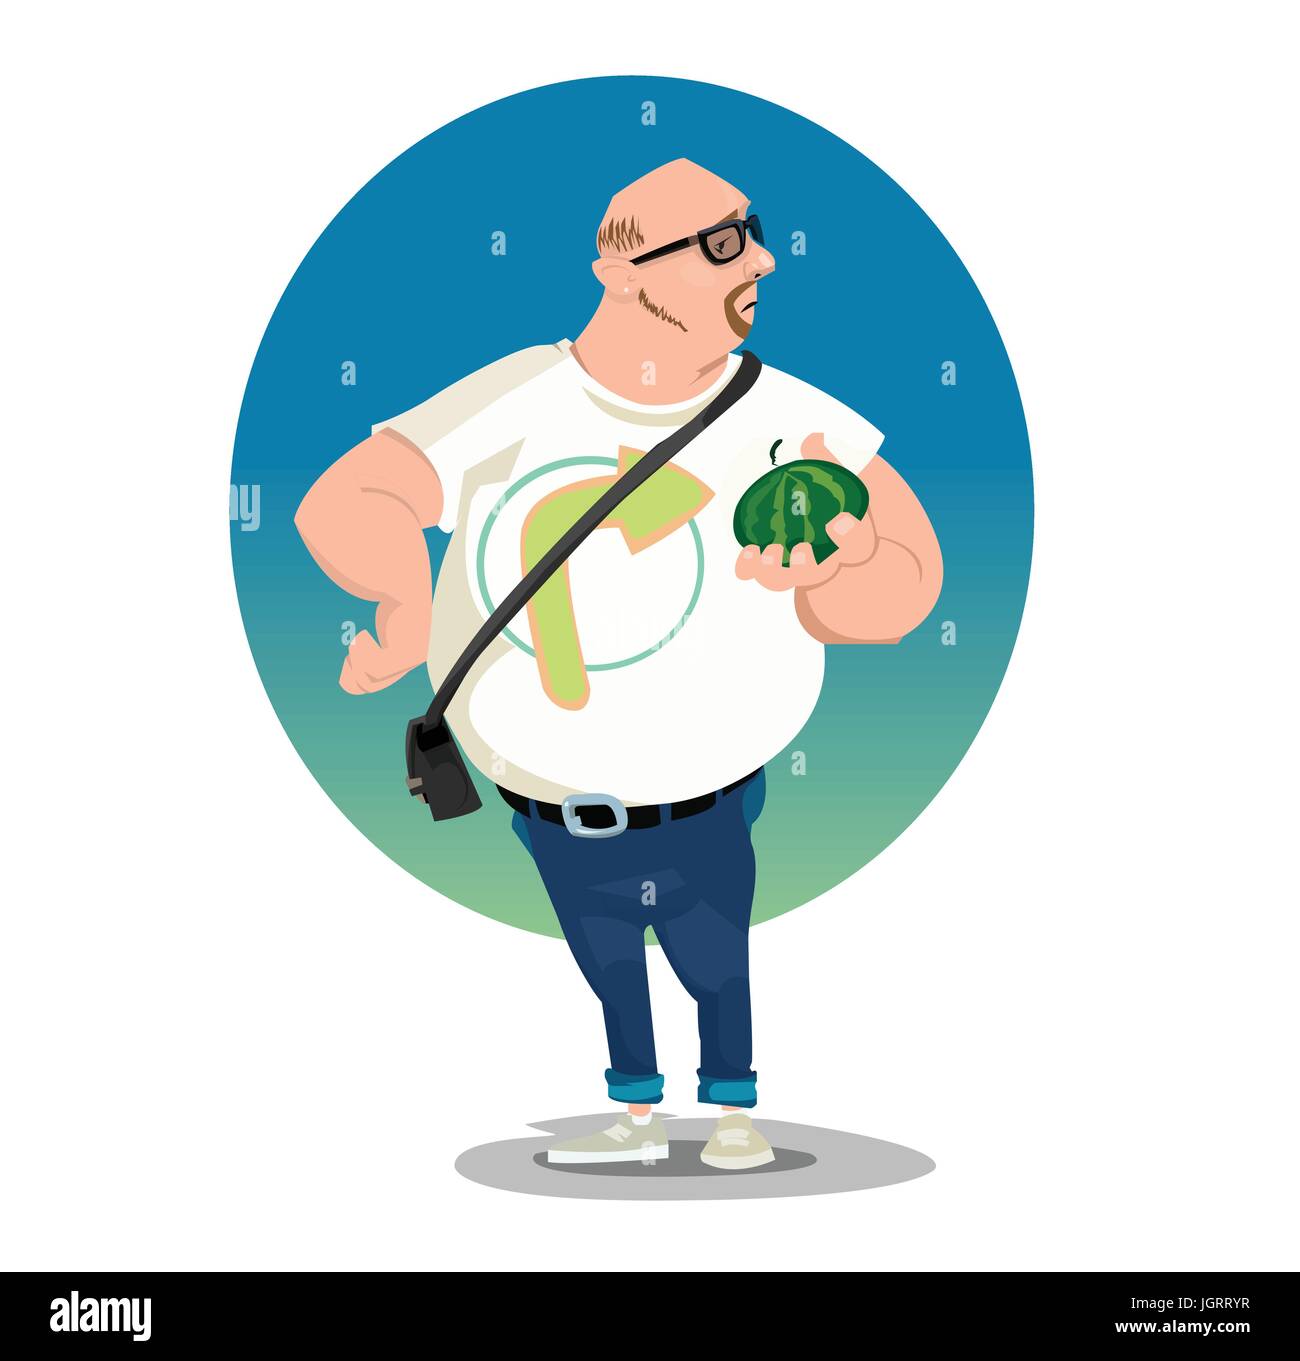 Digital vector funny comic cartoon big bald man with glasses and belly  holding a small melon, white tshirt with arrow, hand drawn illustration,  abstra Stock Vector Image & Art - Alamy